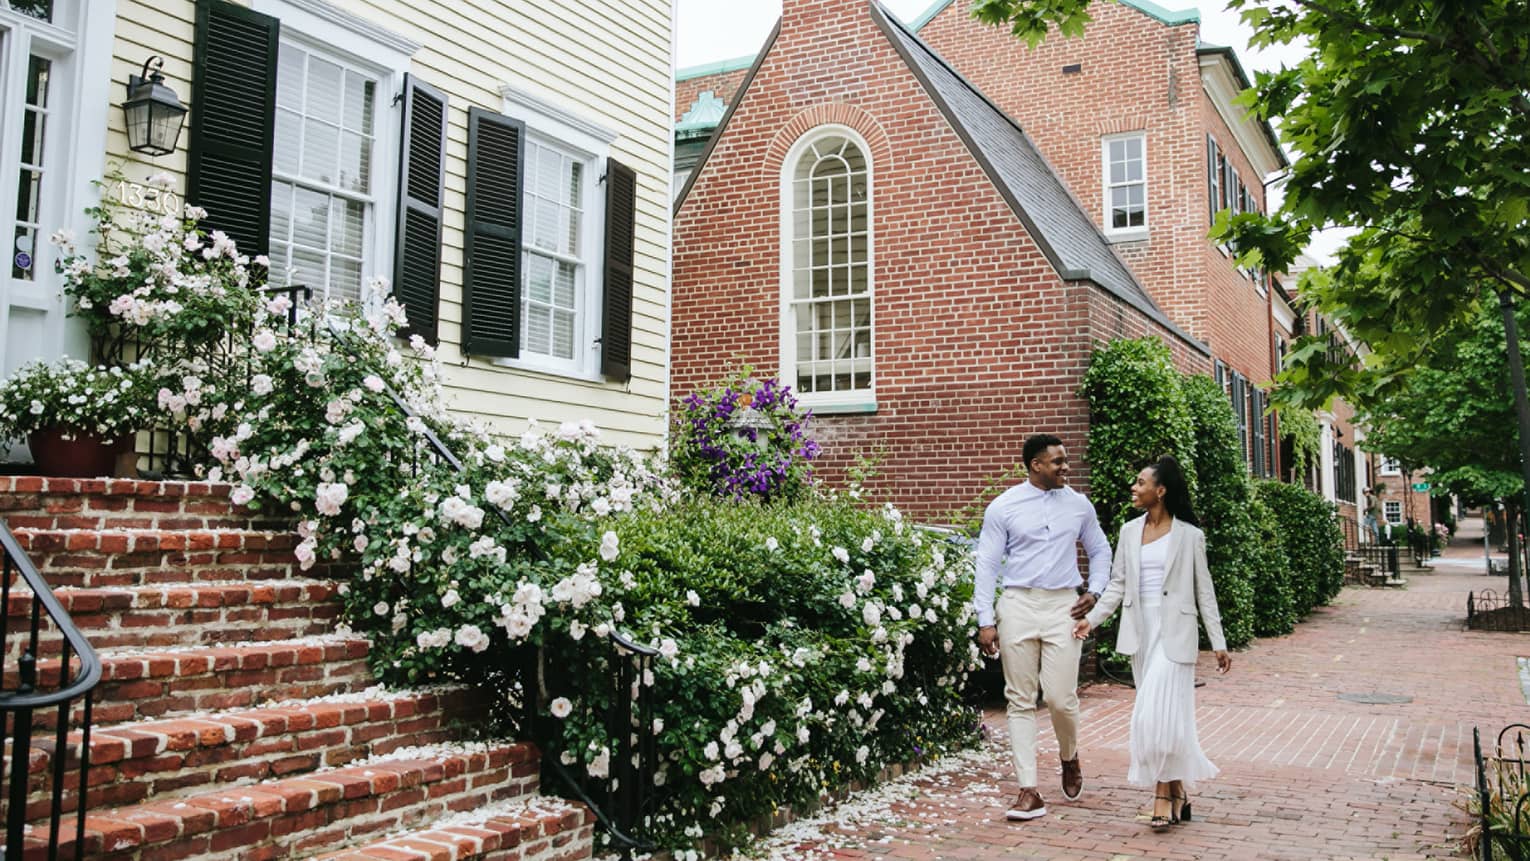 Two guests walking on a brick sidewalk beside houses and flowers.